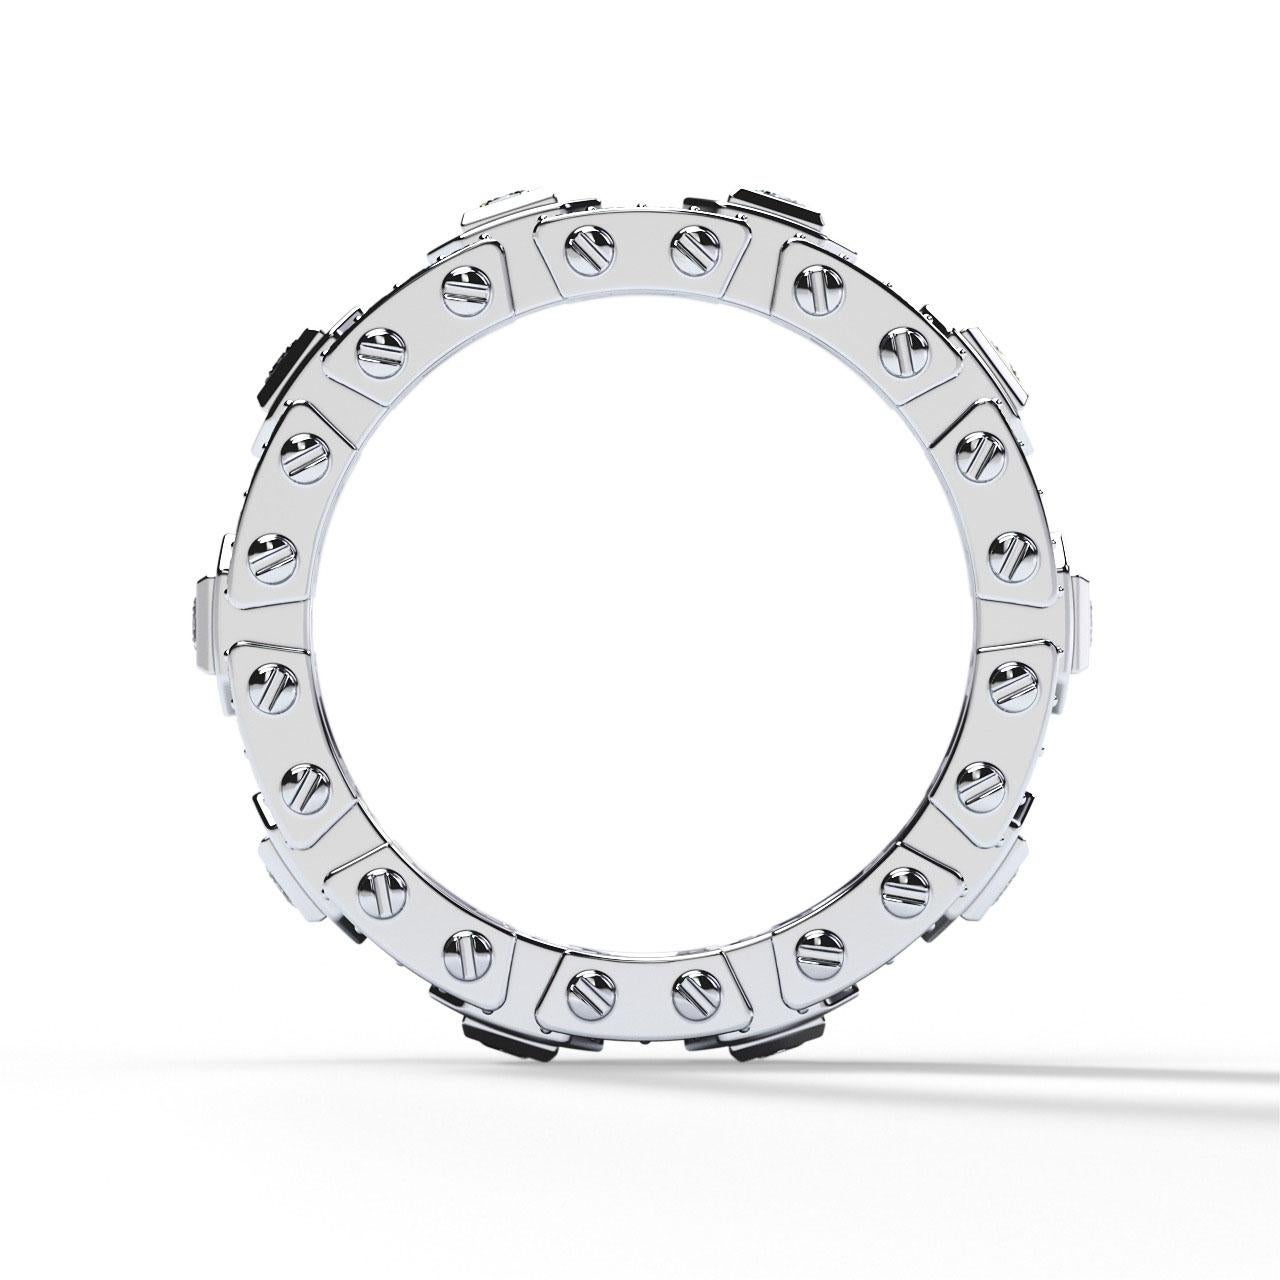 The design of the La Paz bridges two different styles in its variations of 1.20-carat diamond pave setting and metals: contemporary classic and cutting-edge modern. Unlike most Rockford products which are fully bespoke, this ring is pre-customized